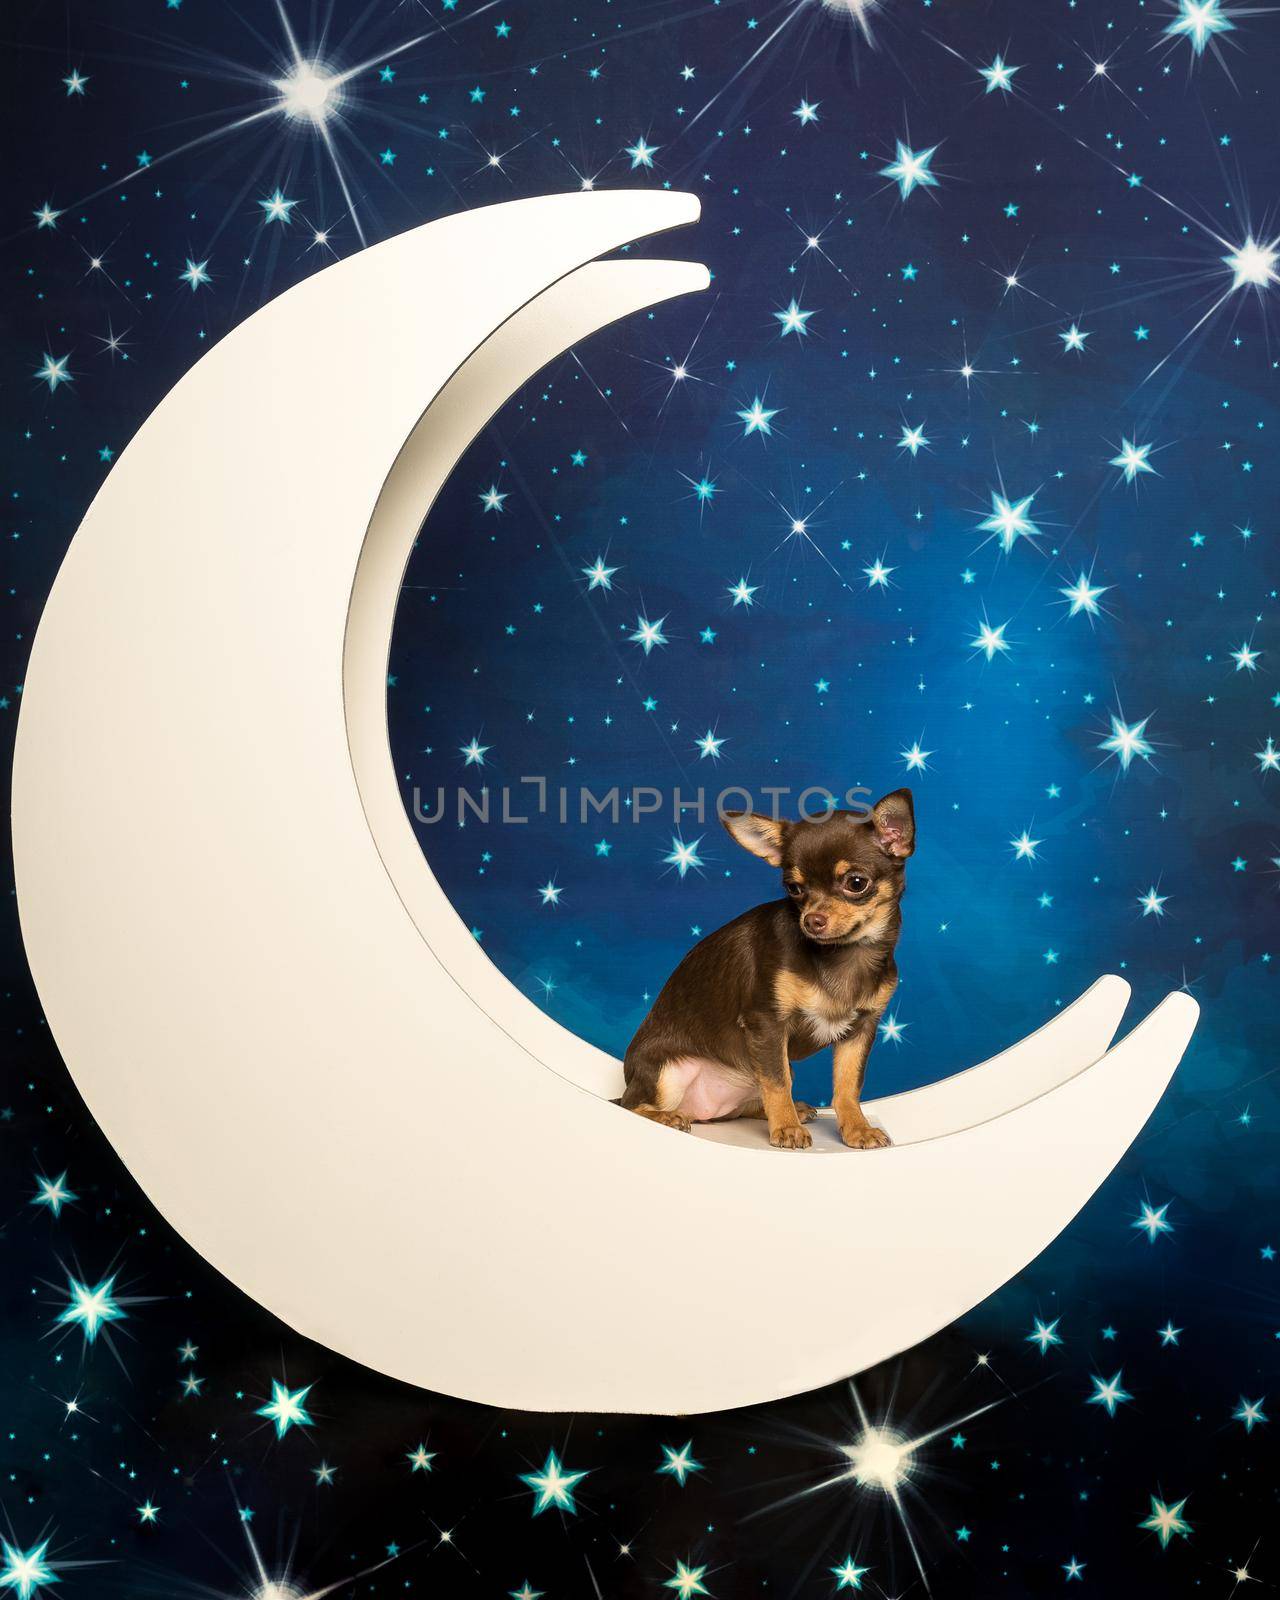 Little multicolored chihuahua at moon in starry background by LeoniekvanderVliet